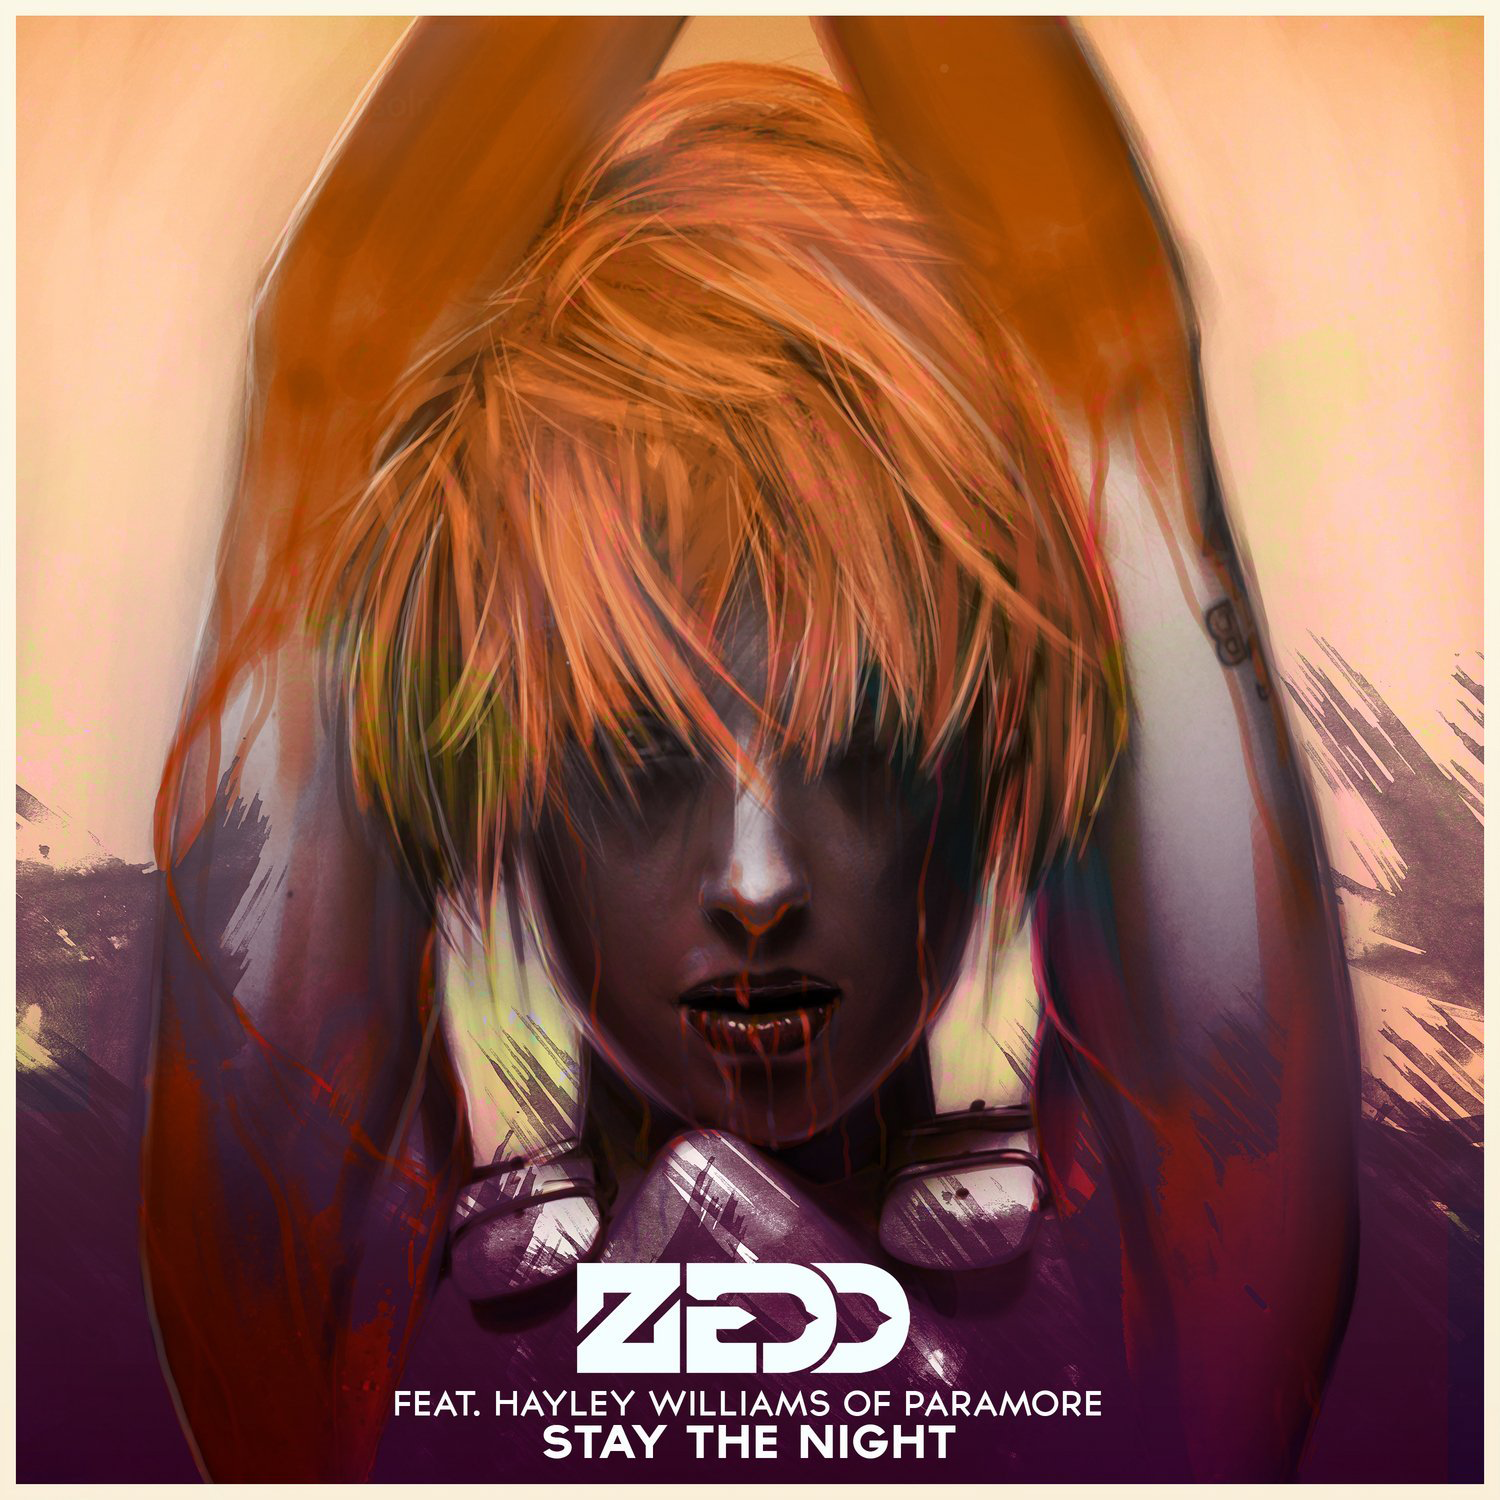 Zedd – Stay The Night ft. Hayley Williams of Paramore